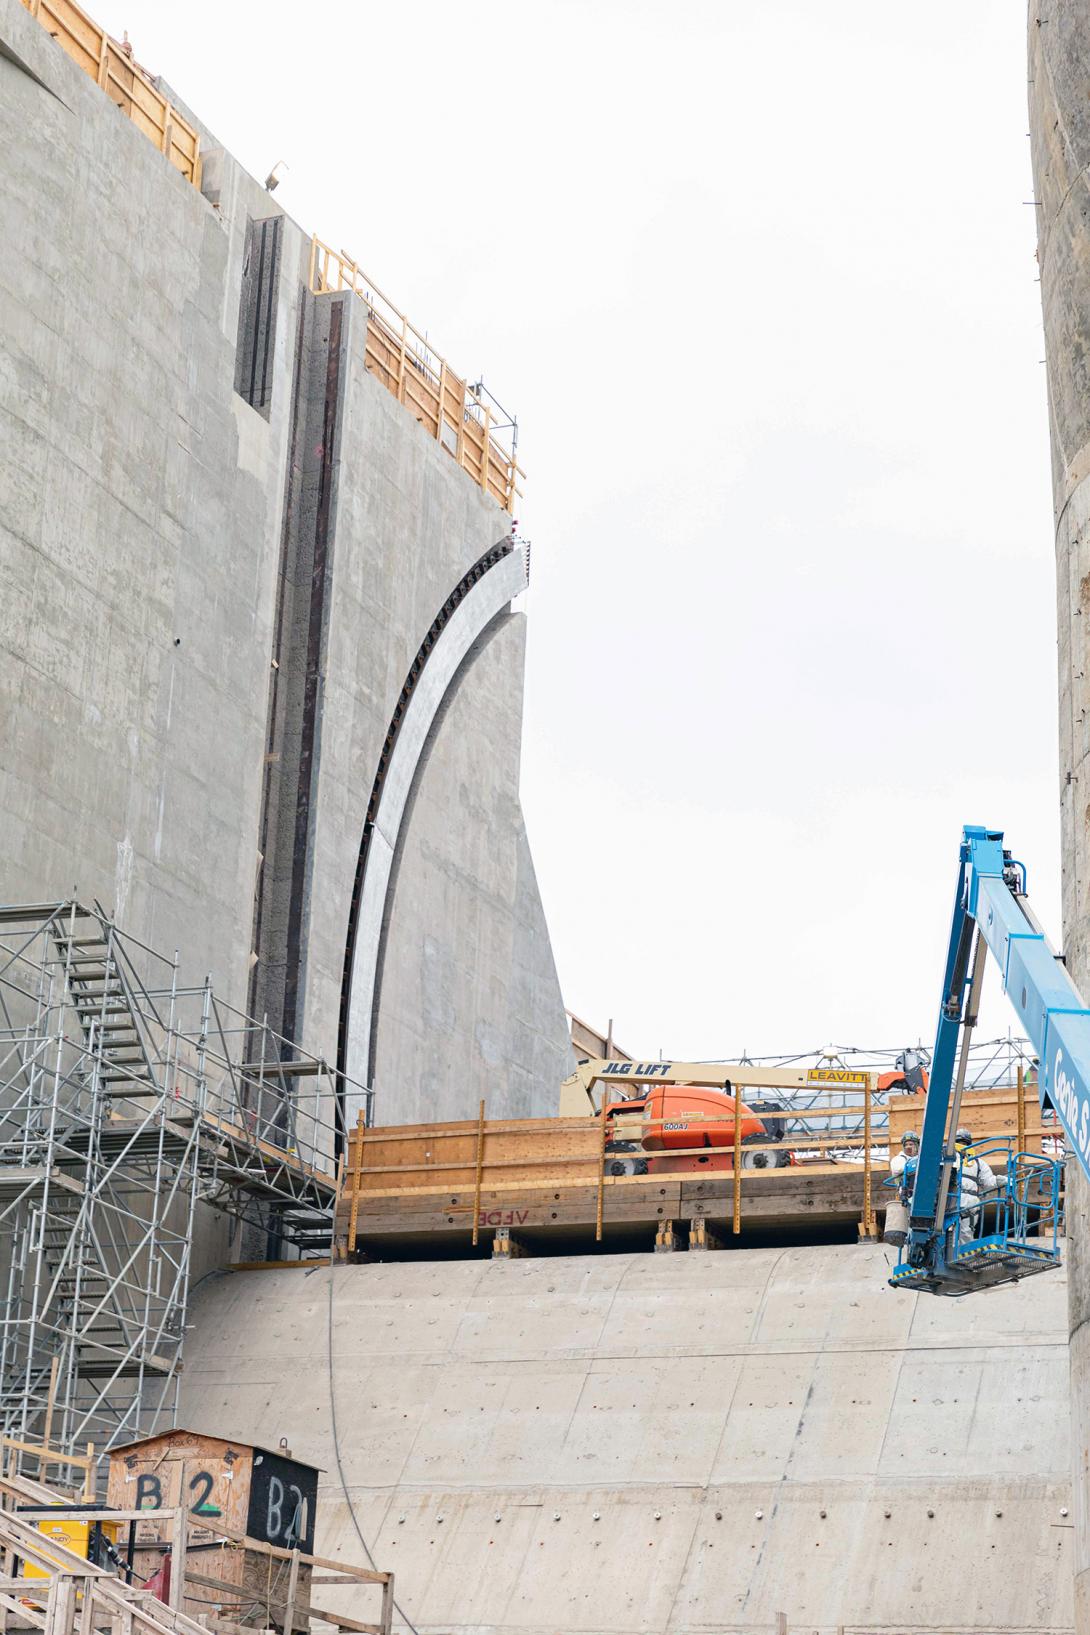 Gate guides for the radial and maintenance gates, which lift and allow water to flow into the spillway. | November 2022